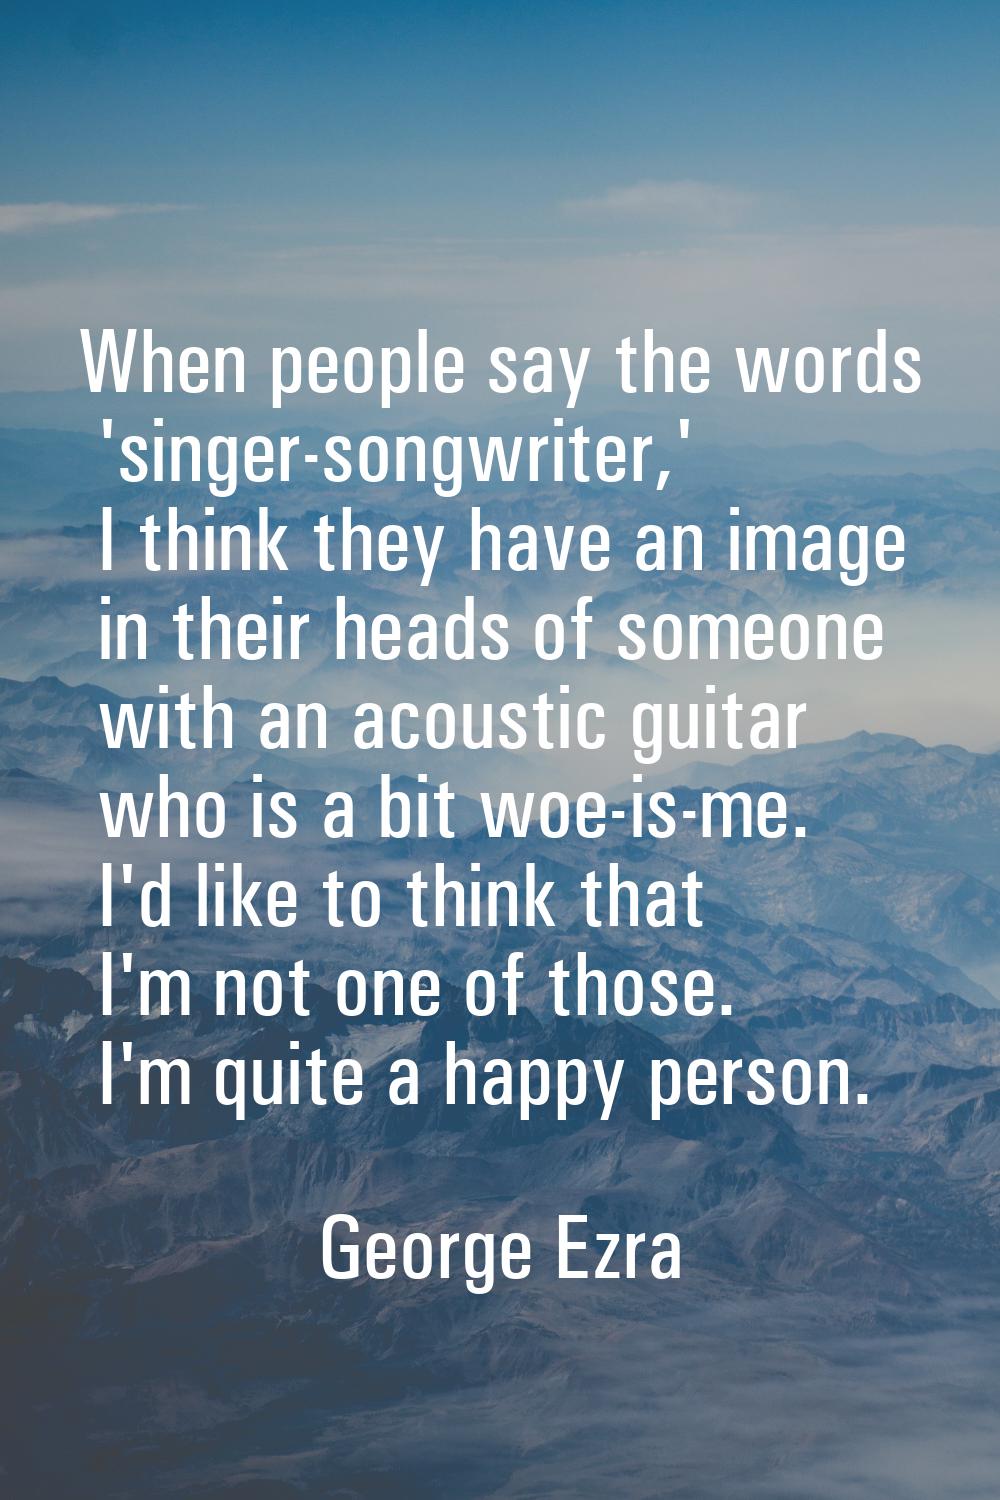 When people say the words 'singer-songwriter,' I think they have an image in their heads of someone